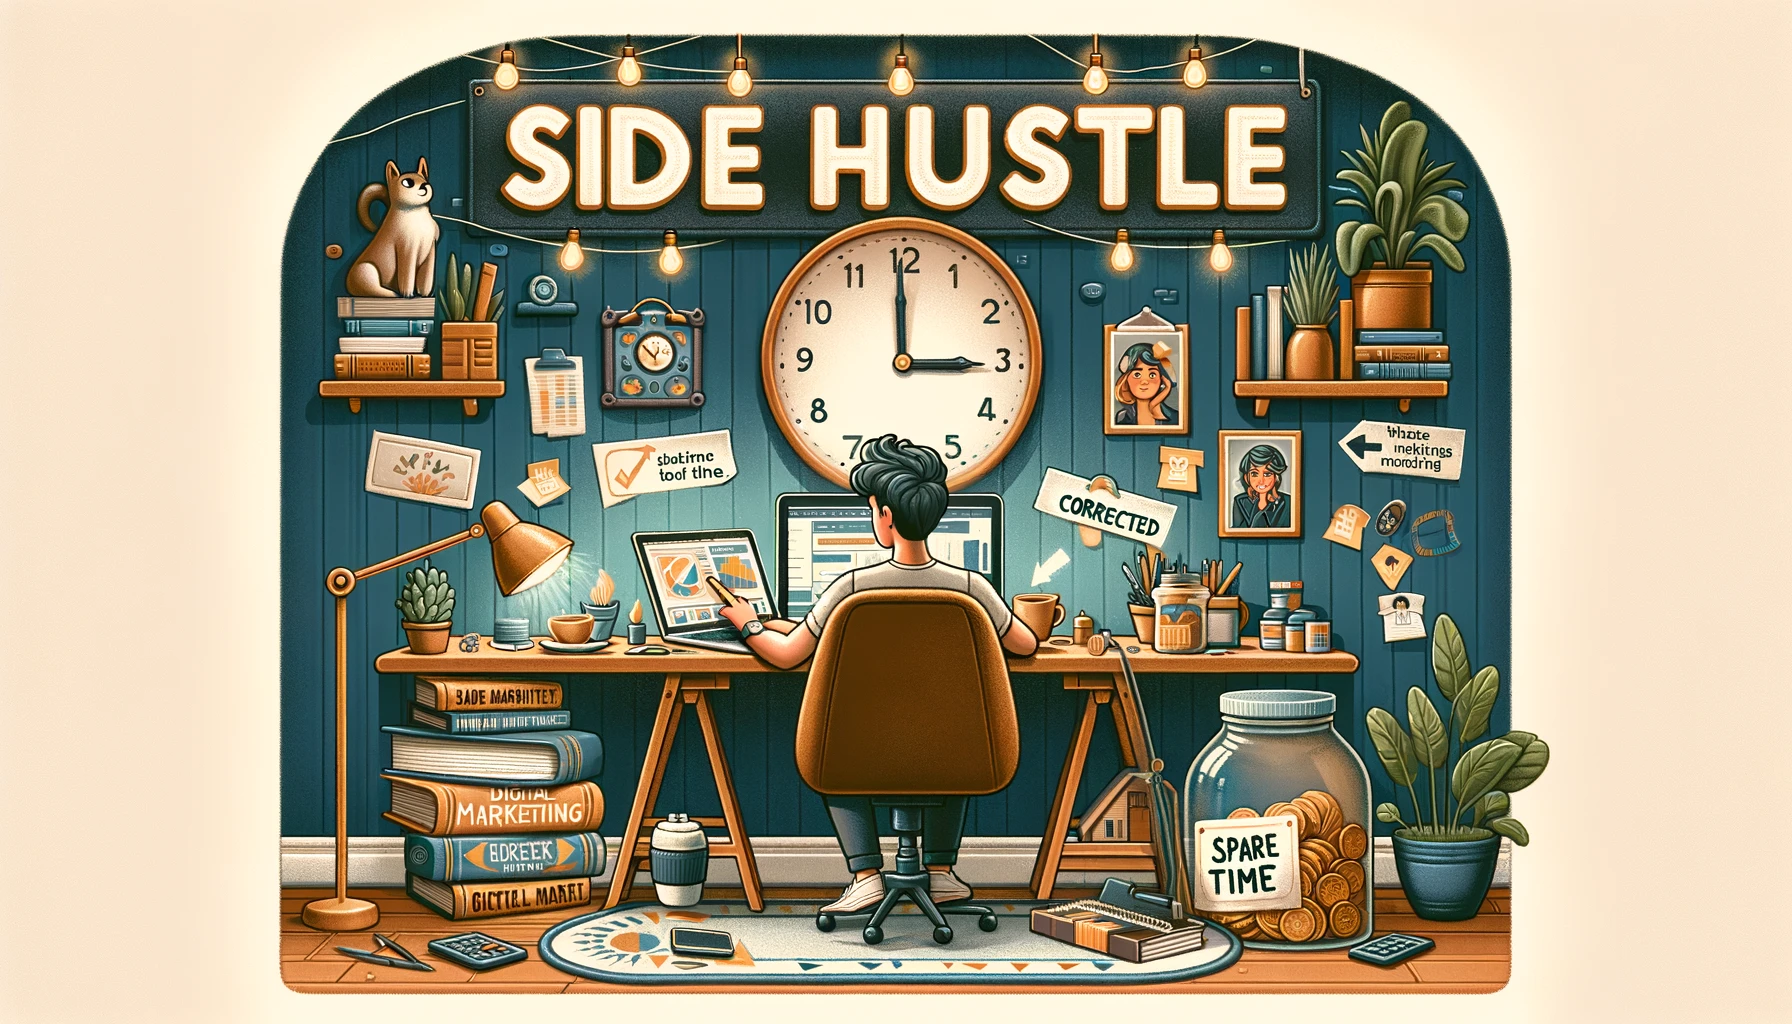 How to Start a Side Hustle to Earn Extra Income?